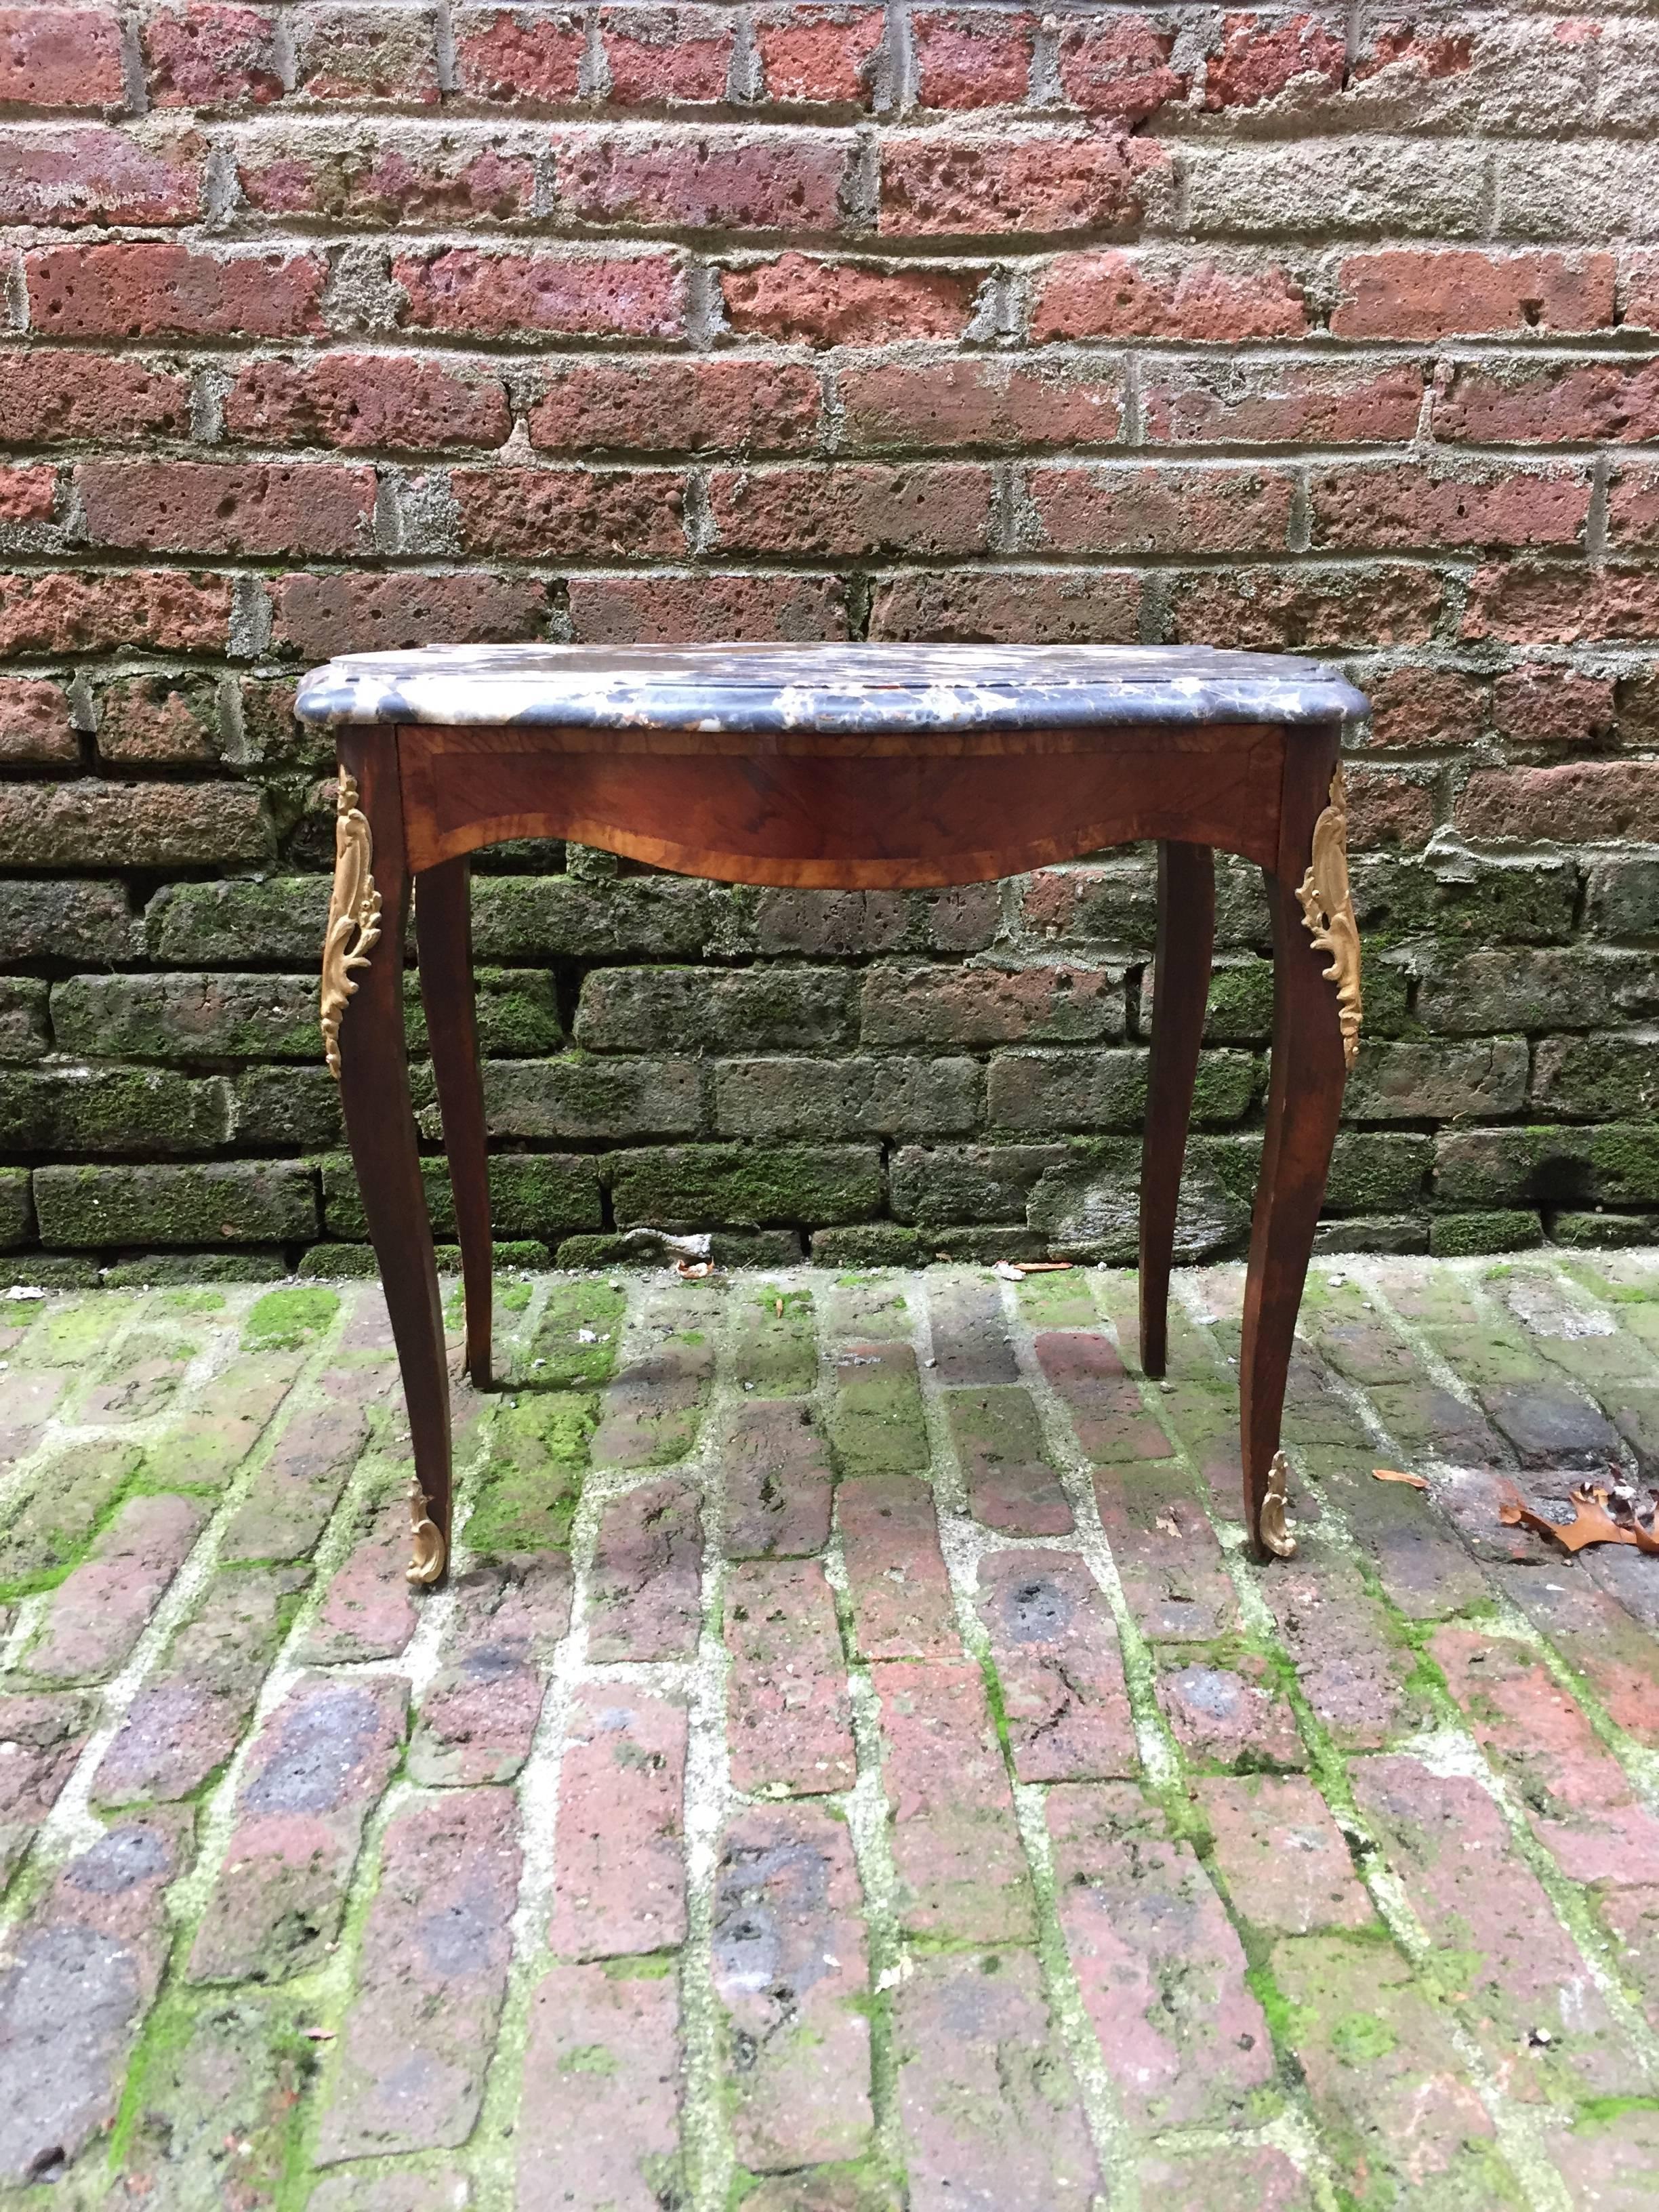 Quality 1950s, Louis XV reproduction with featuring inlaid bombe support with ormolu mounted cabriole legs with a wonderful piece of Breche marble. Ink stamped, France on the inside stretcher. Satinwood, fruitwood and walnut veneers, circa